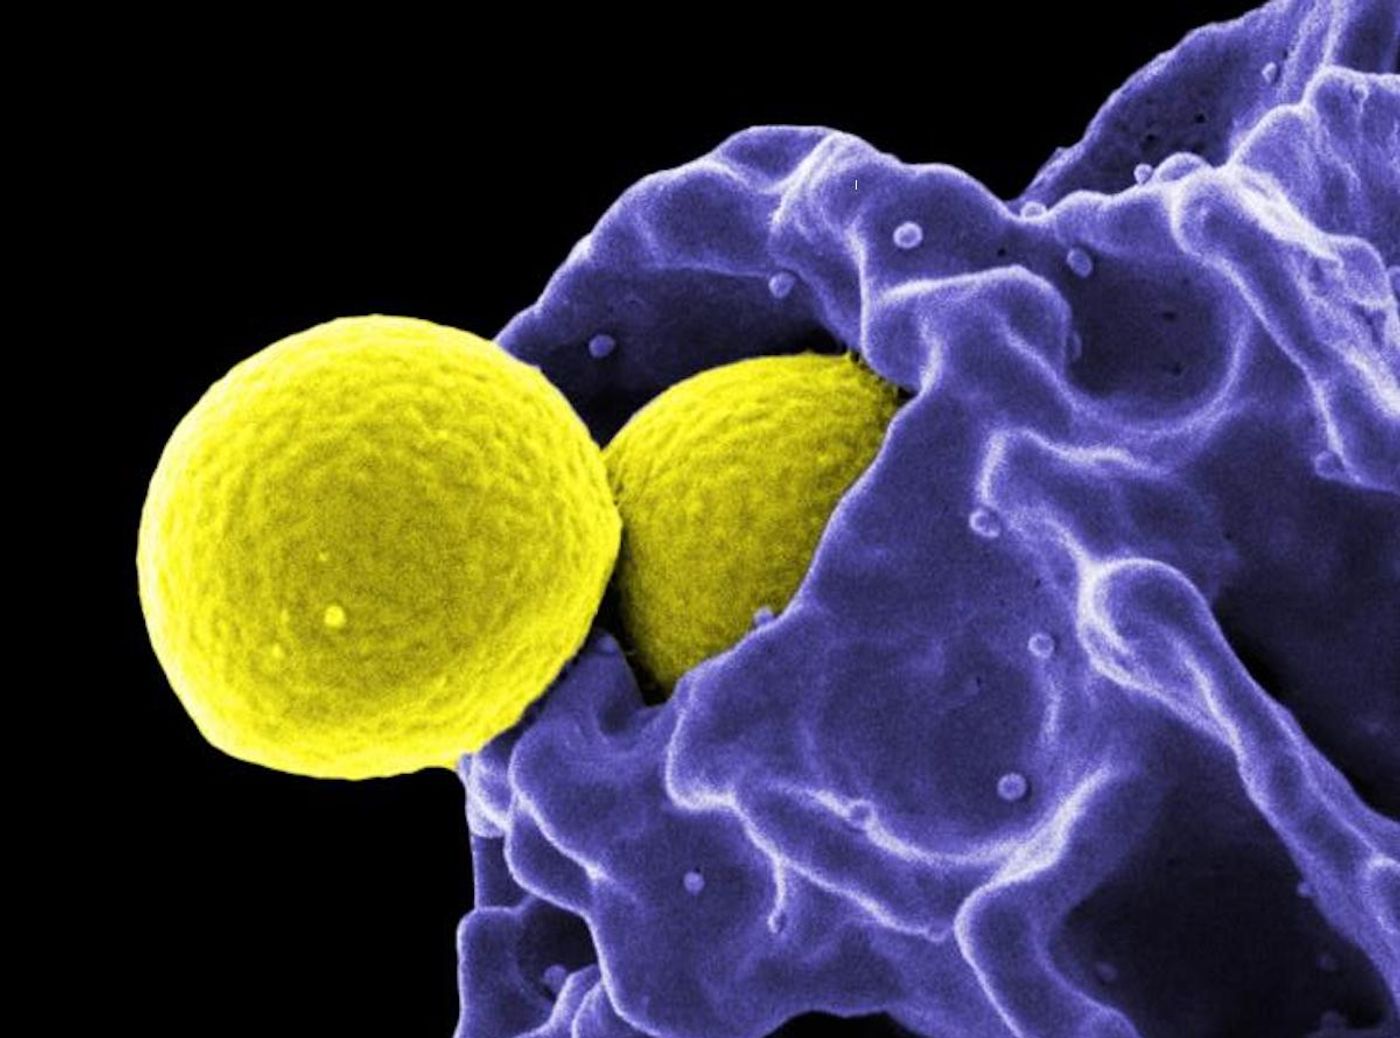 This SEM image by National Institute of Allergy and Infectious Diseases (NIAID) depicts two, yellow Staphylococcus aureus (MRSA) bacteria being phagocytized by a blue-colored neutrophil. / Credit: National Institute of Allergy and Infectious Diseases (NIAID)